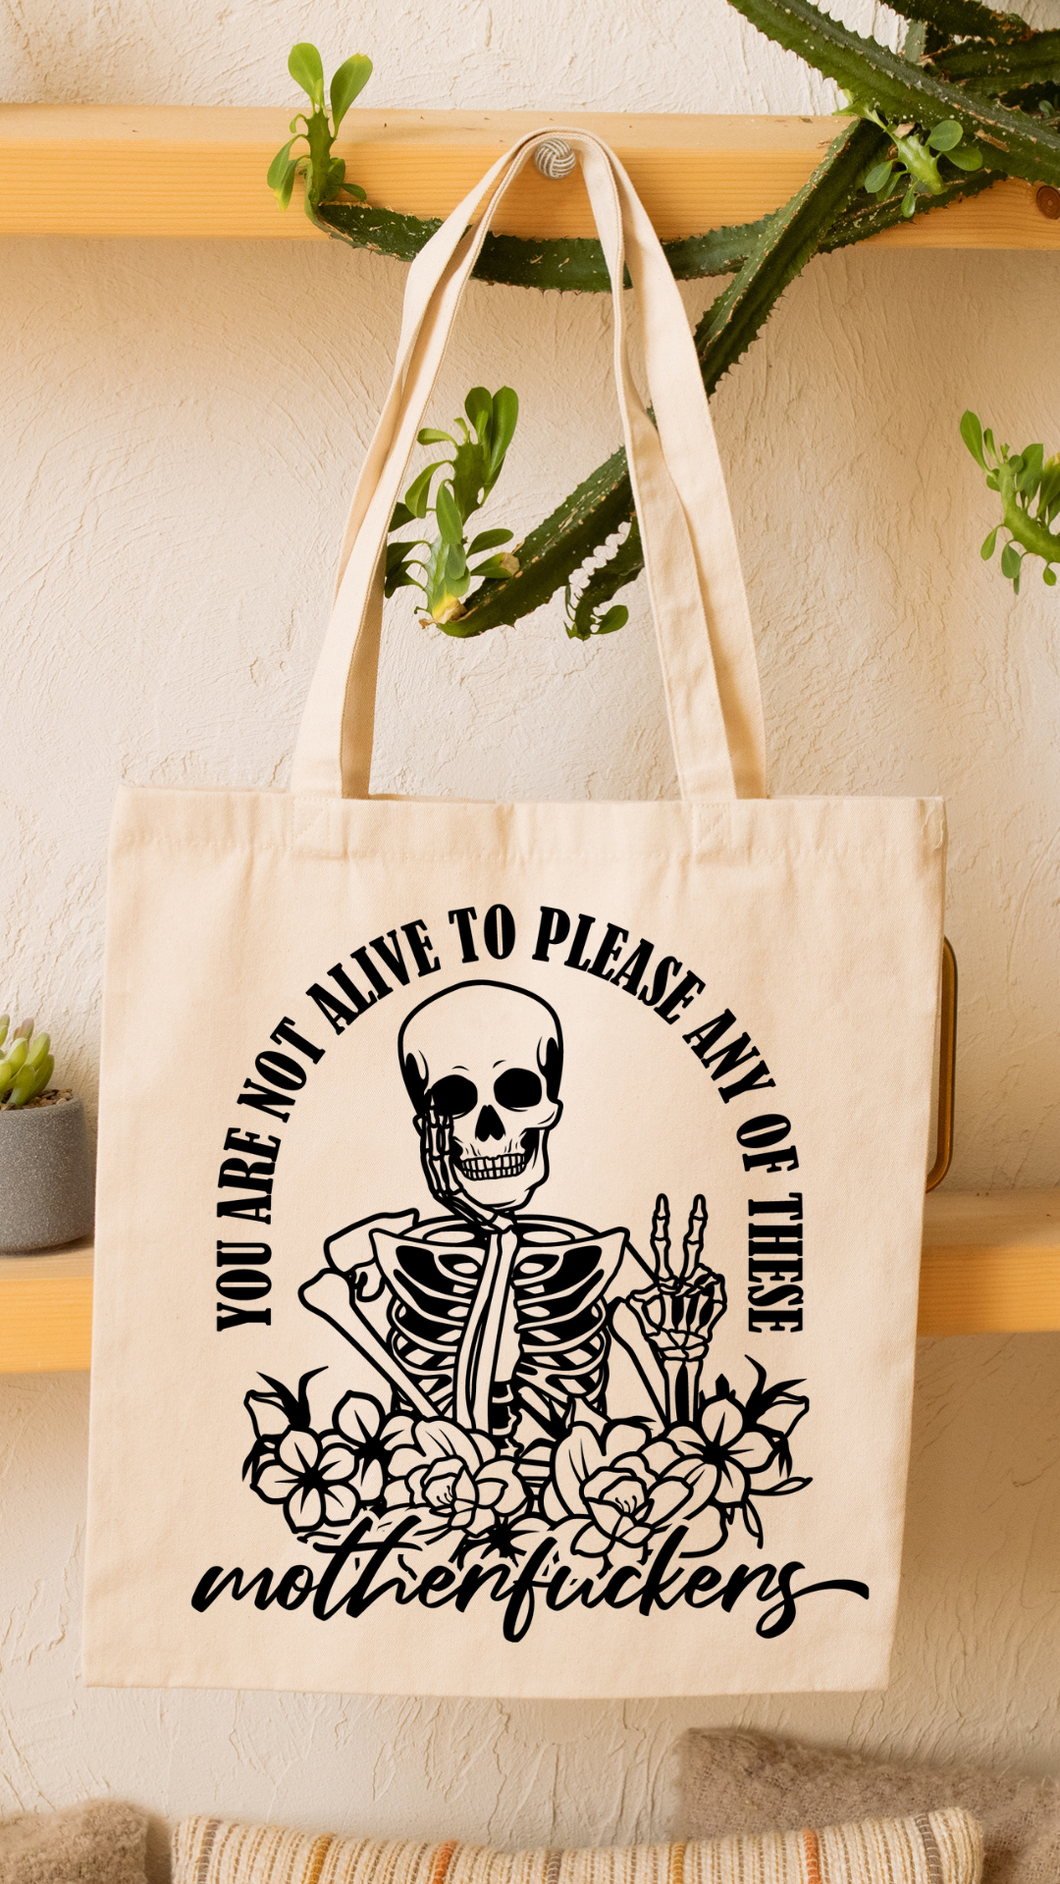 You are not alive to please any of these MOFOS Tote Bag